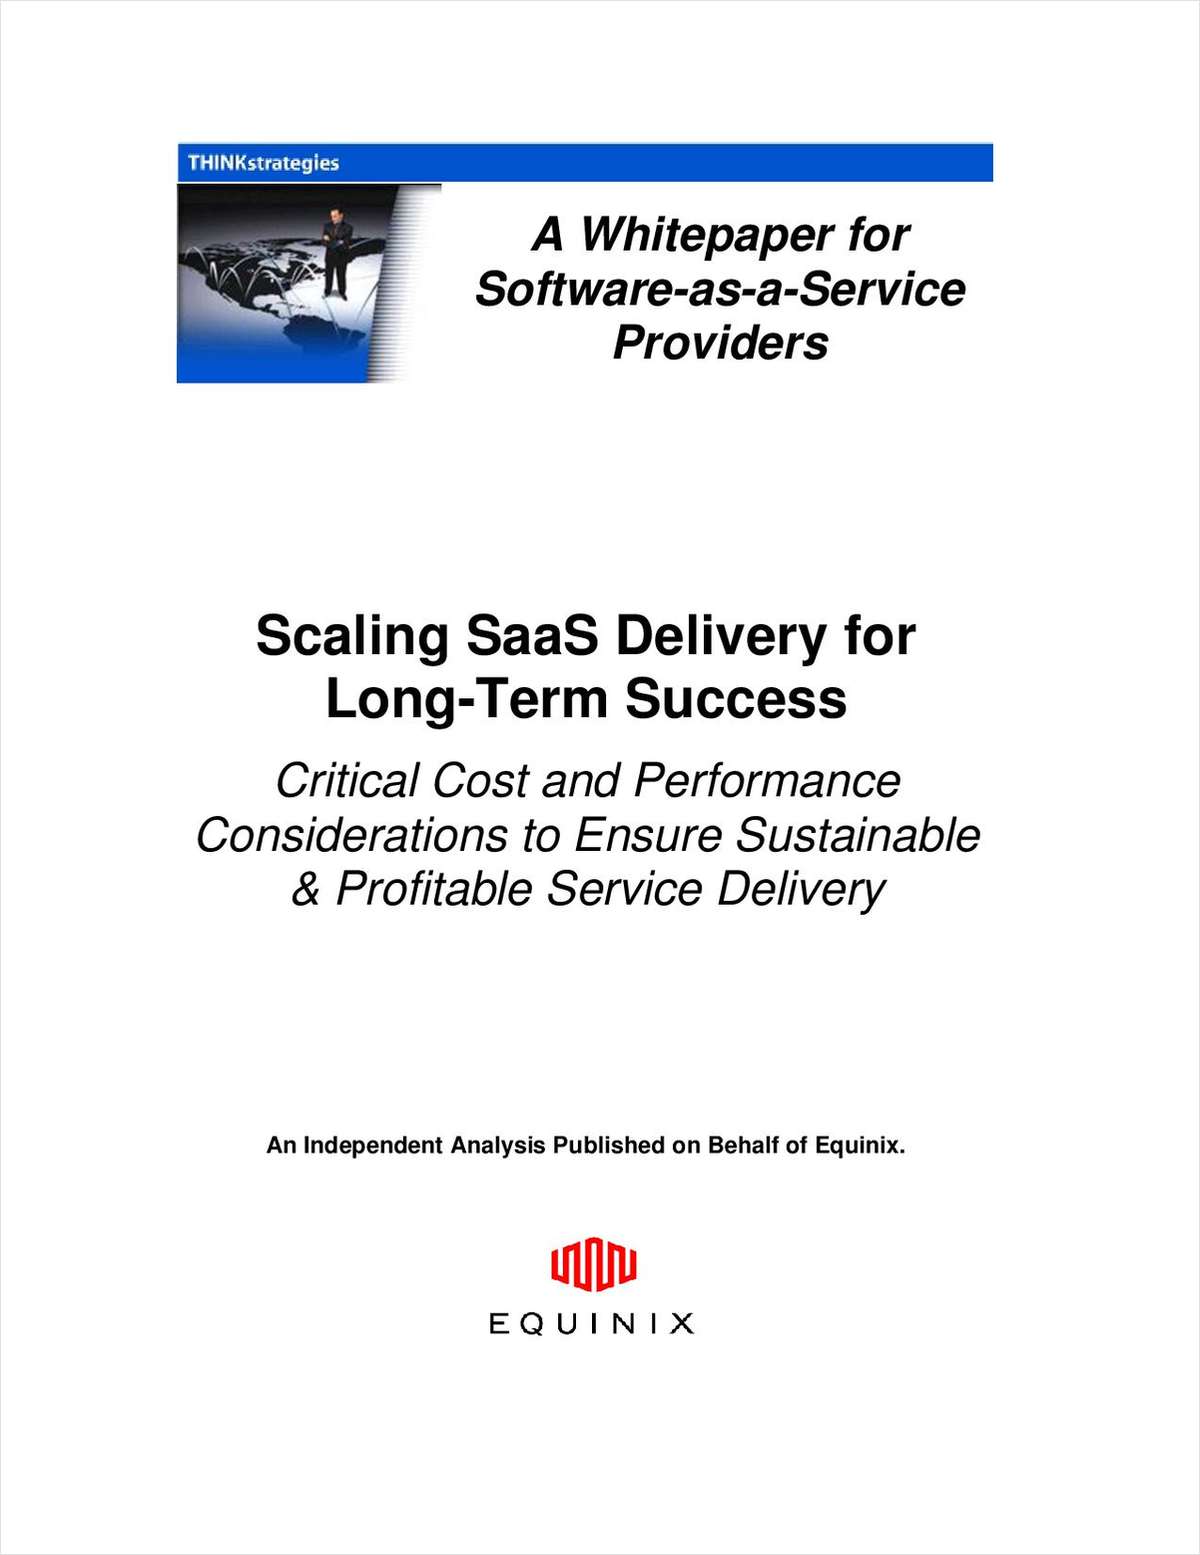 Scaling SaaS Delivery for Long-Term Success